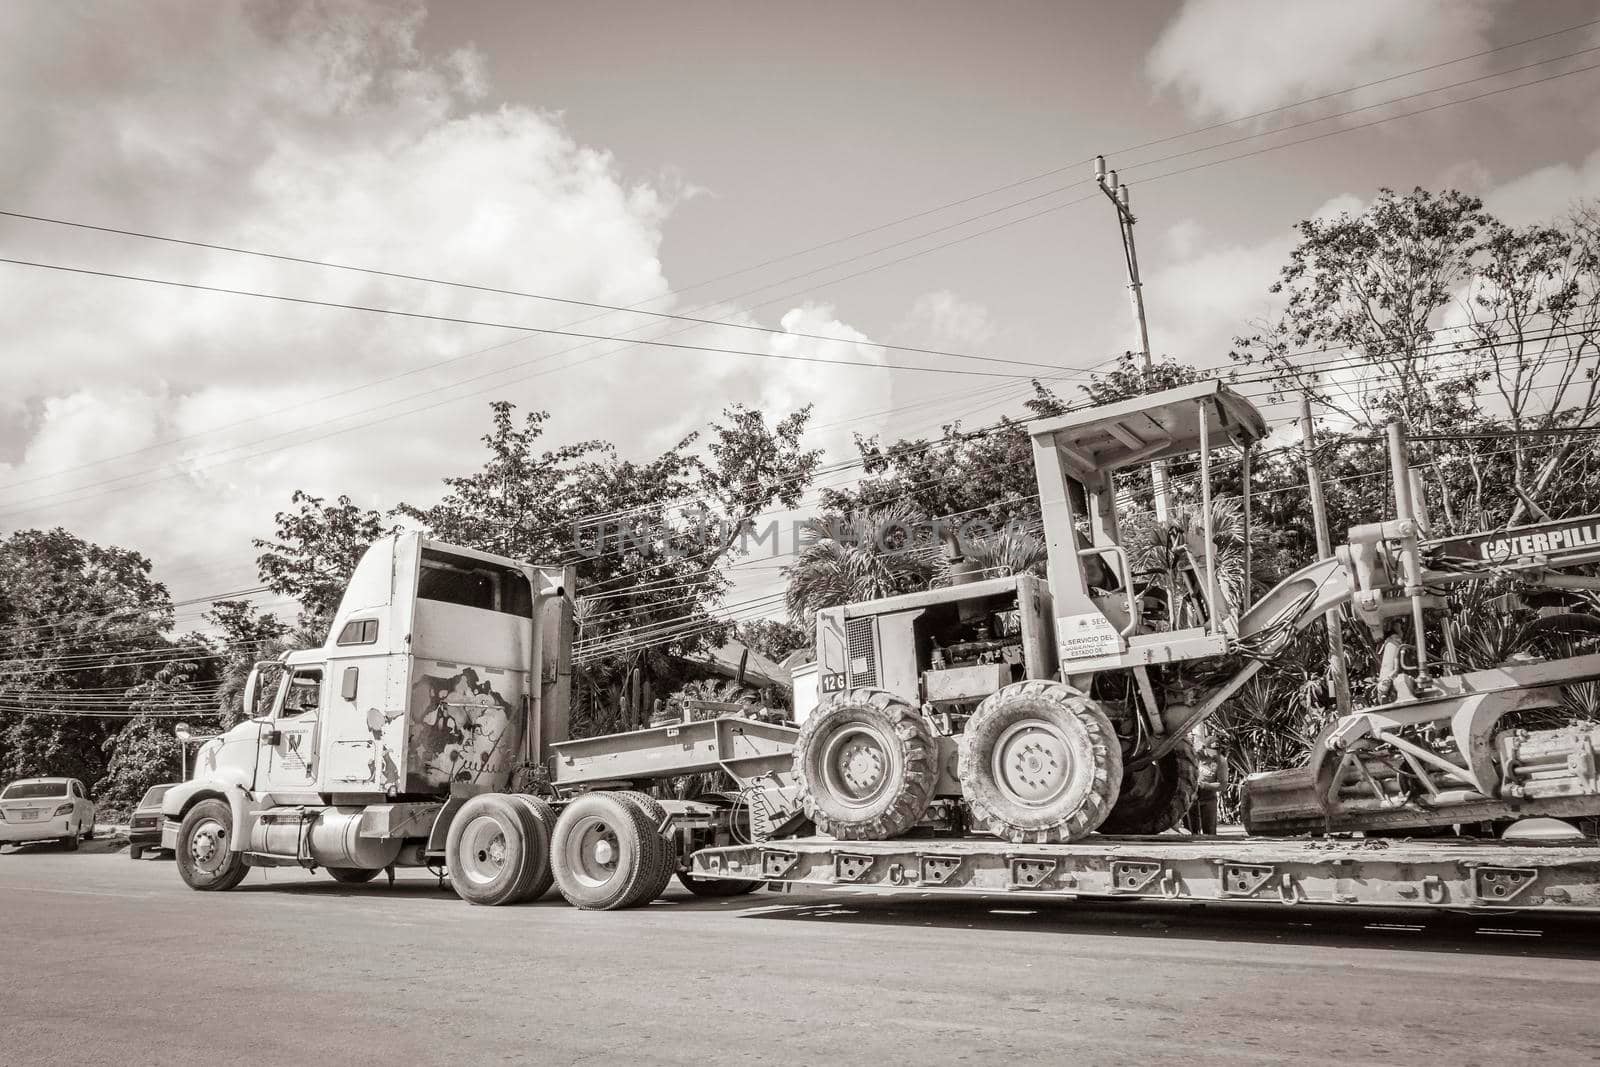 Trucks dump truck and other industrial vehicles in Tulum Mexico. by Arkadij